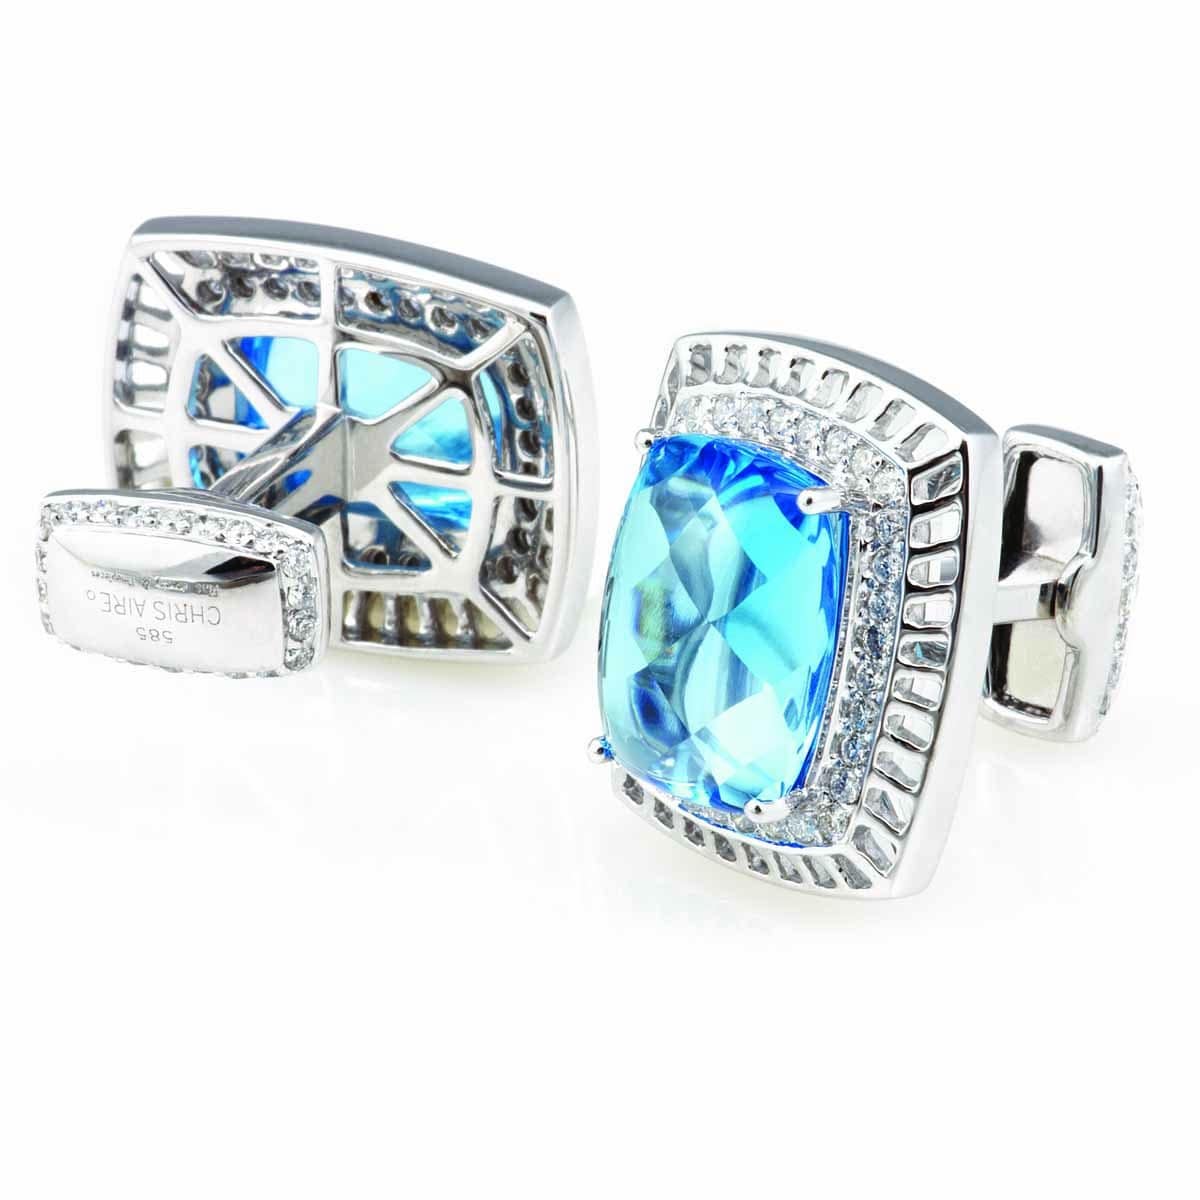 CHRIS AIRE MIRACLE CUFFLINKS - Chris Aire Fine Jewelry & Timepieces